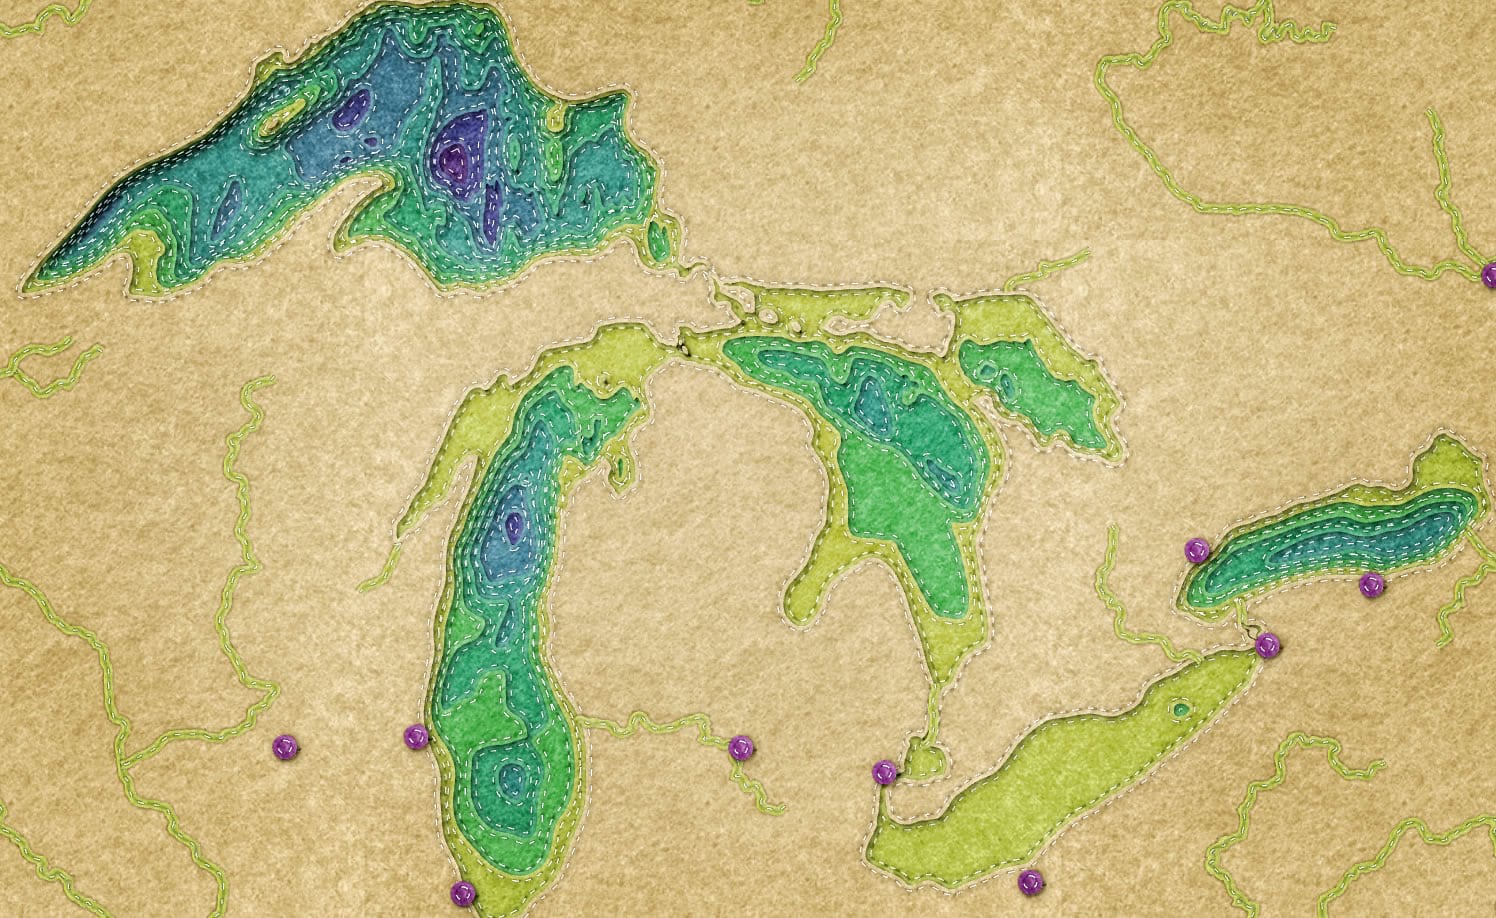 Map made in ArcGIS Pro using the "Felt" style.